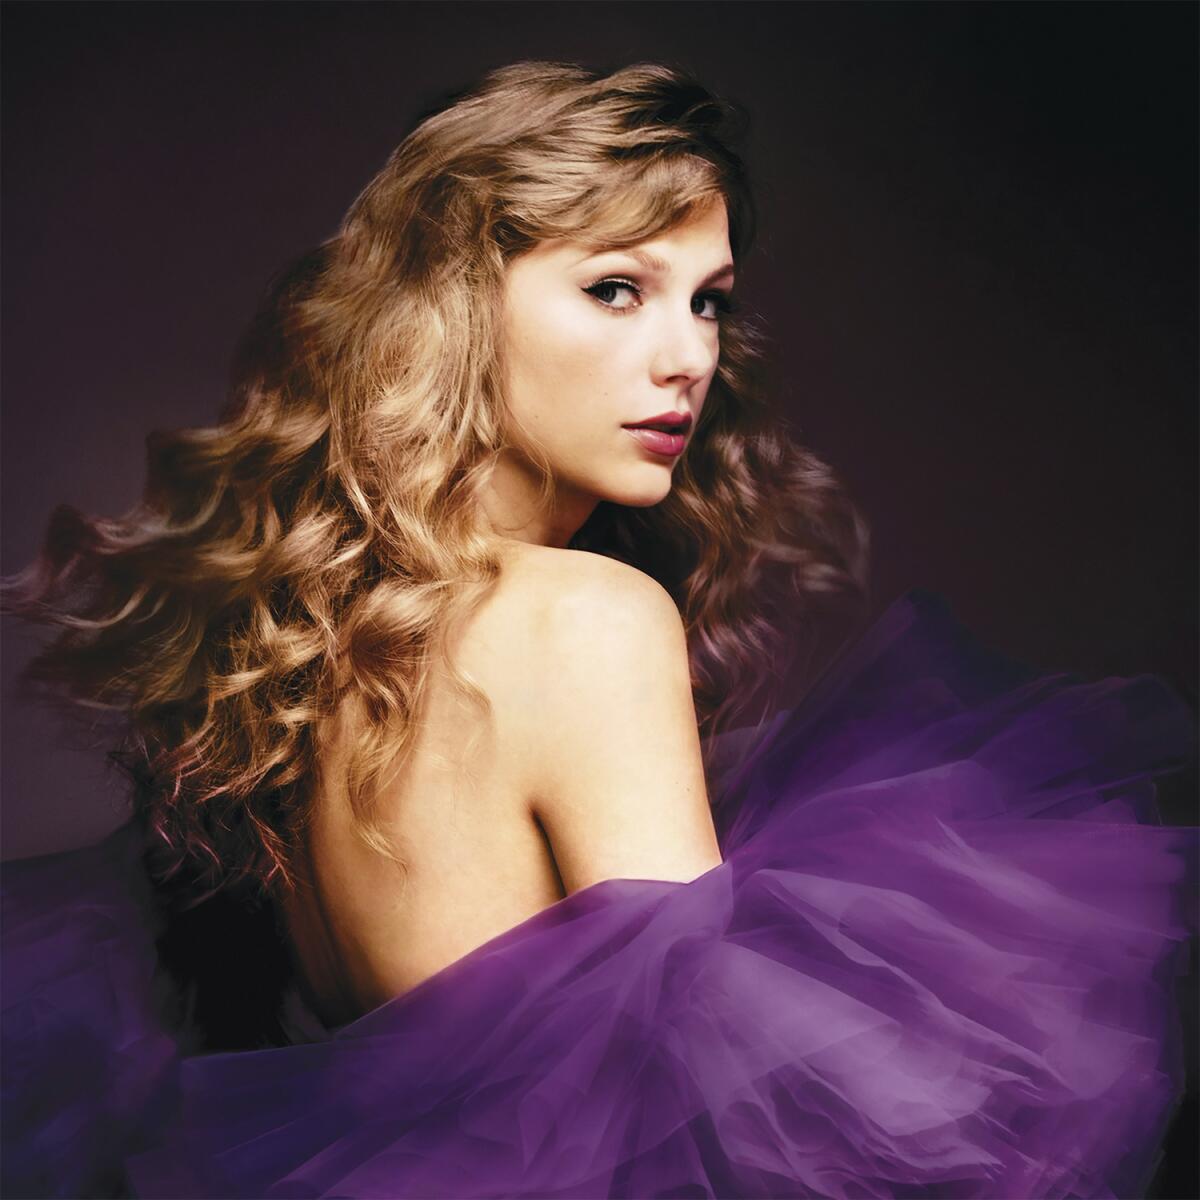 Taylor Swift wears a puffy purple dress as she looks over her right shoulder to pose for a photo